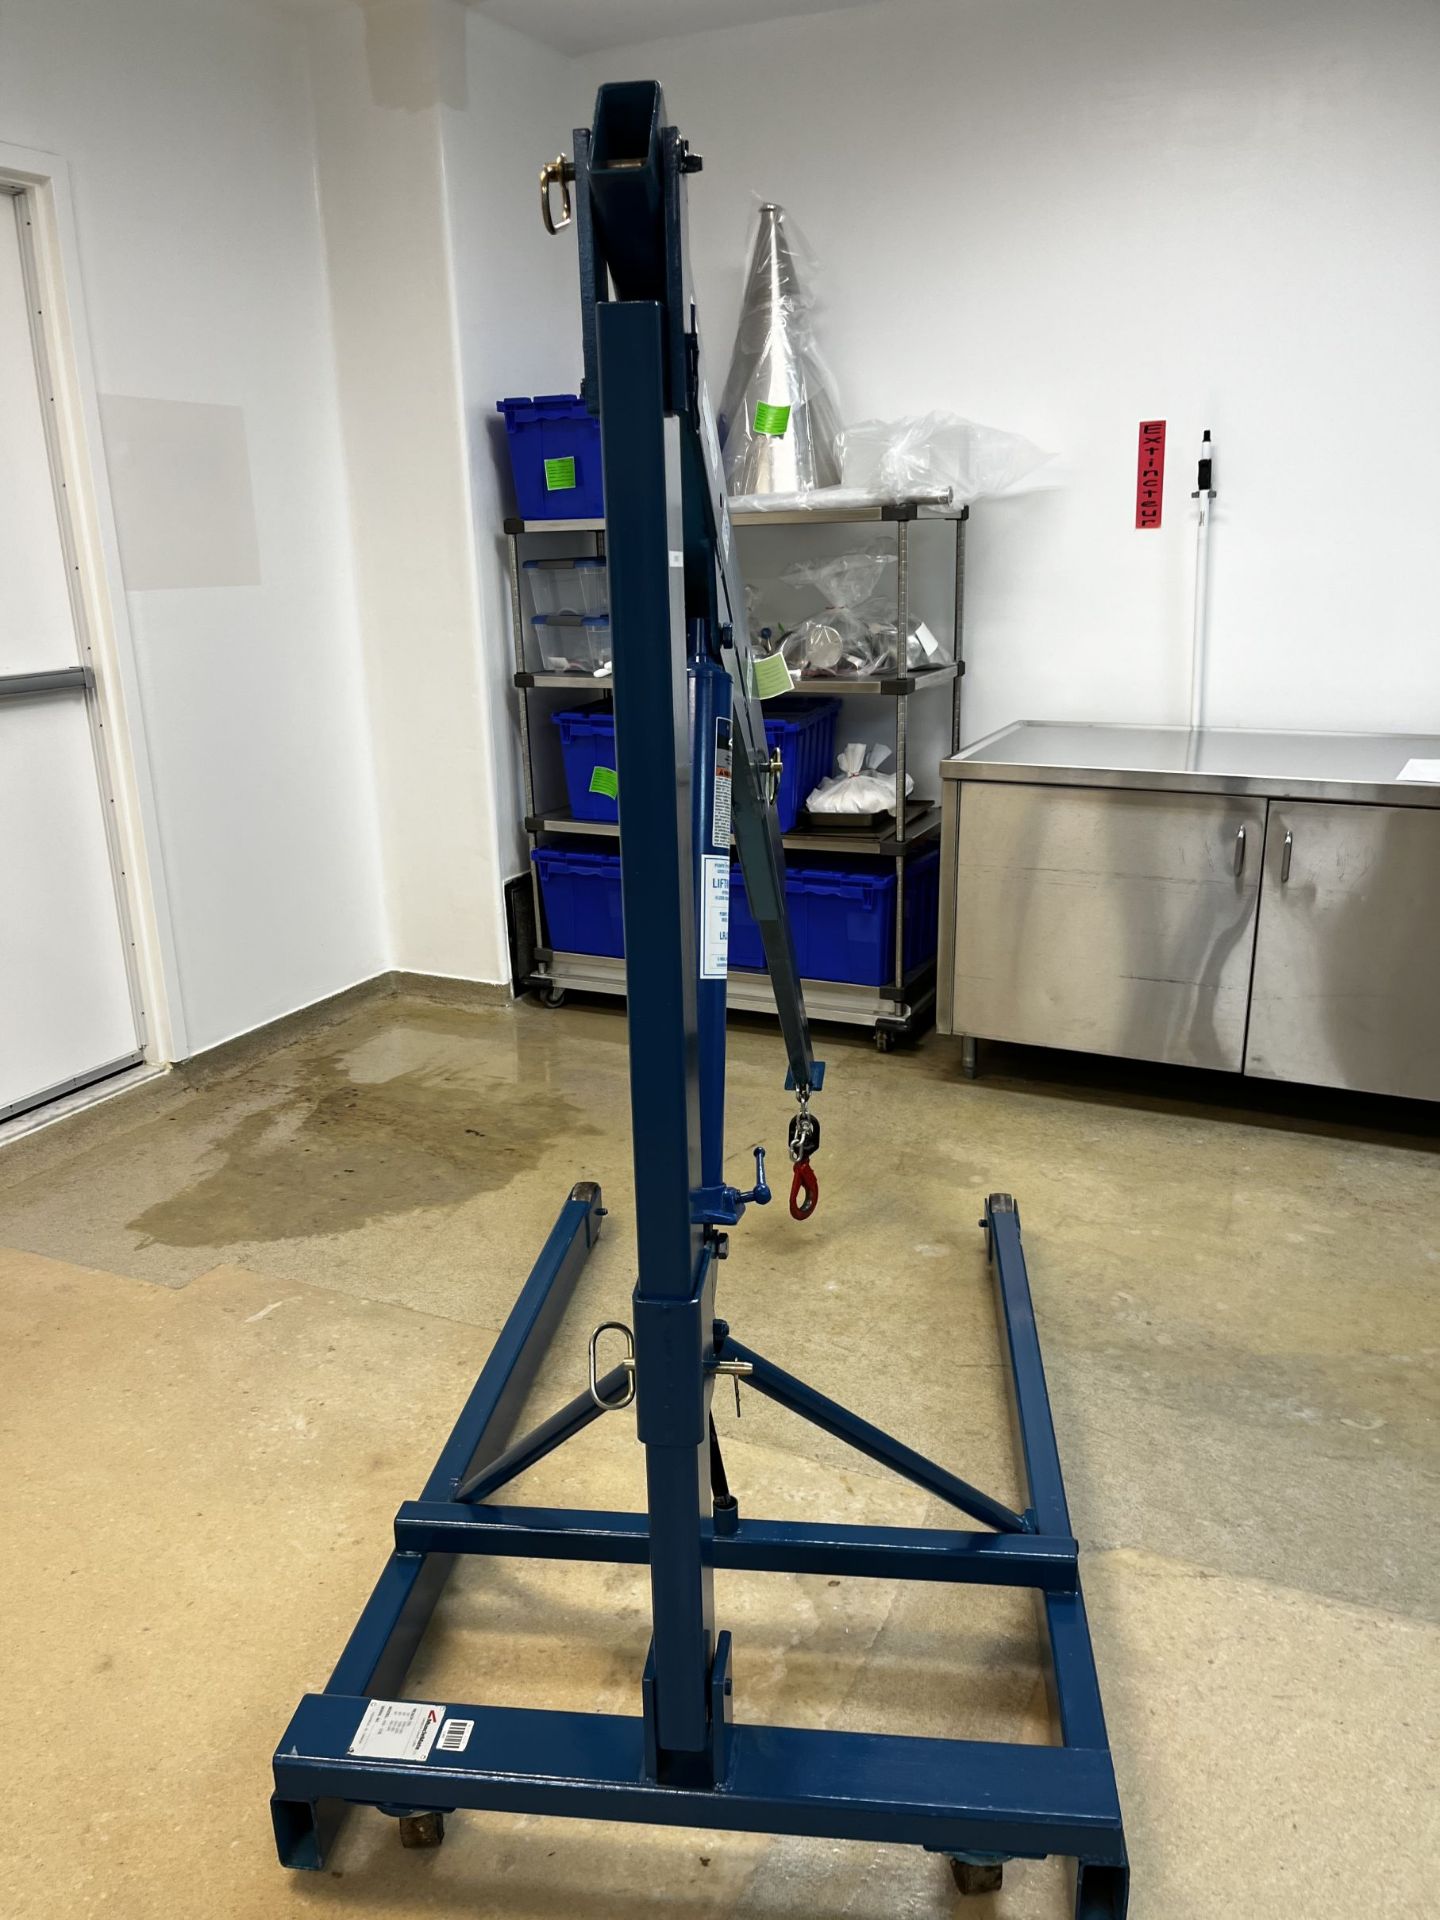 MuscleMate Series 400-20B Portable Floor Crane - Image 2 of 7